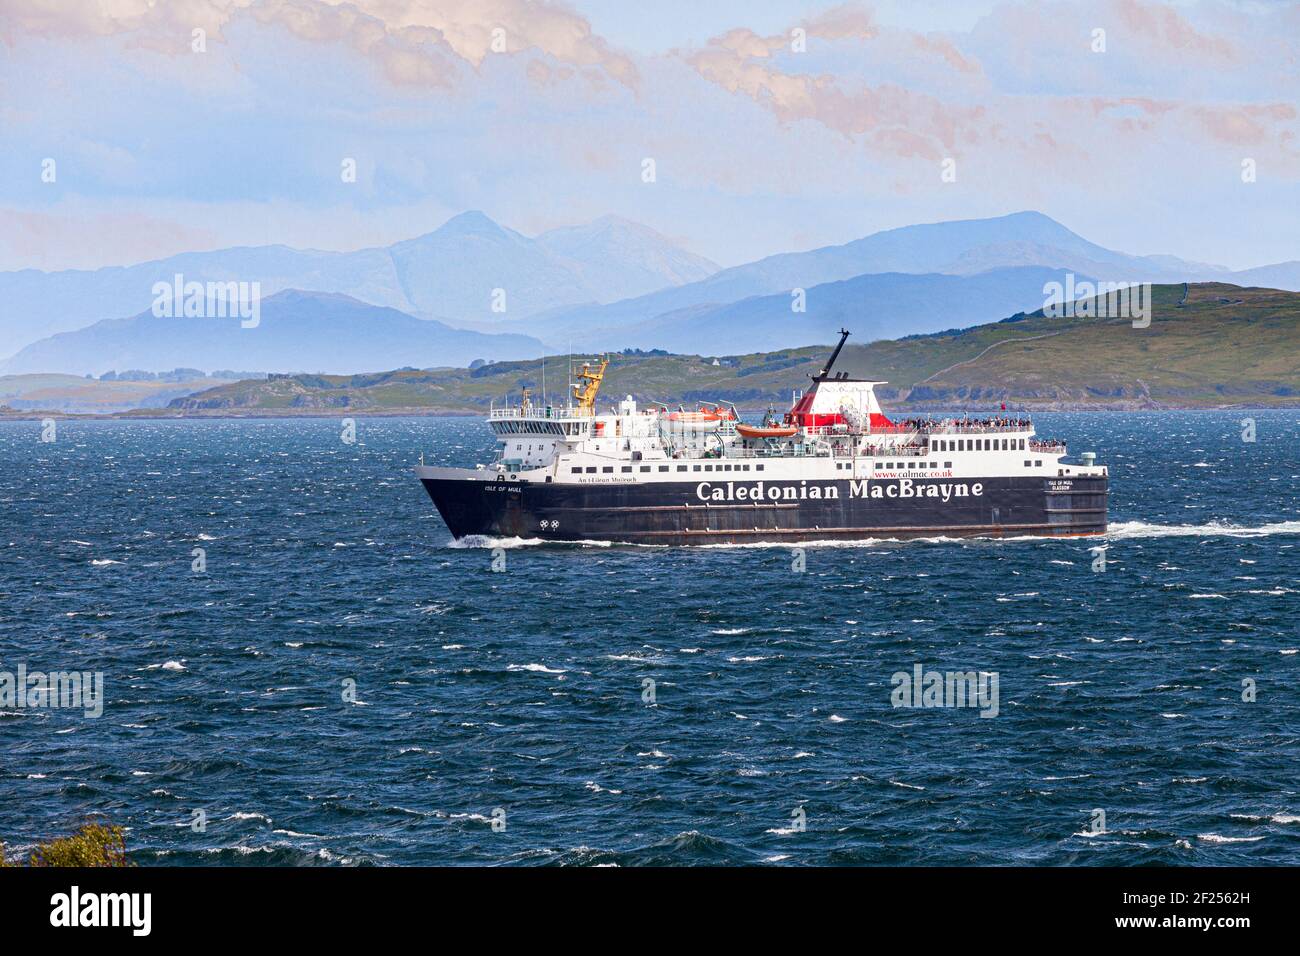 The 'Isle of Mull' Caledonian MacBrayne ferry from the Scottish mainland at Oban approaching the Isle of Mull over a choppy sea, Argyll and Bute Stock Photo